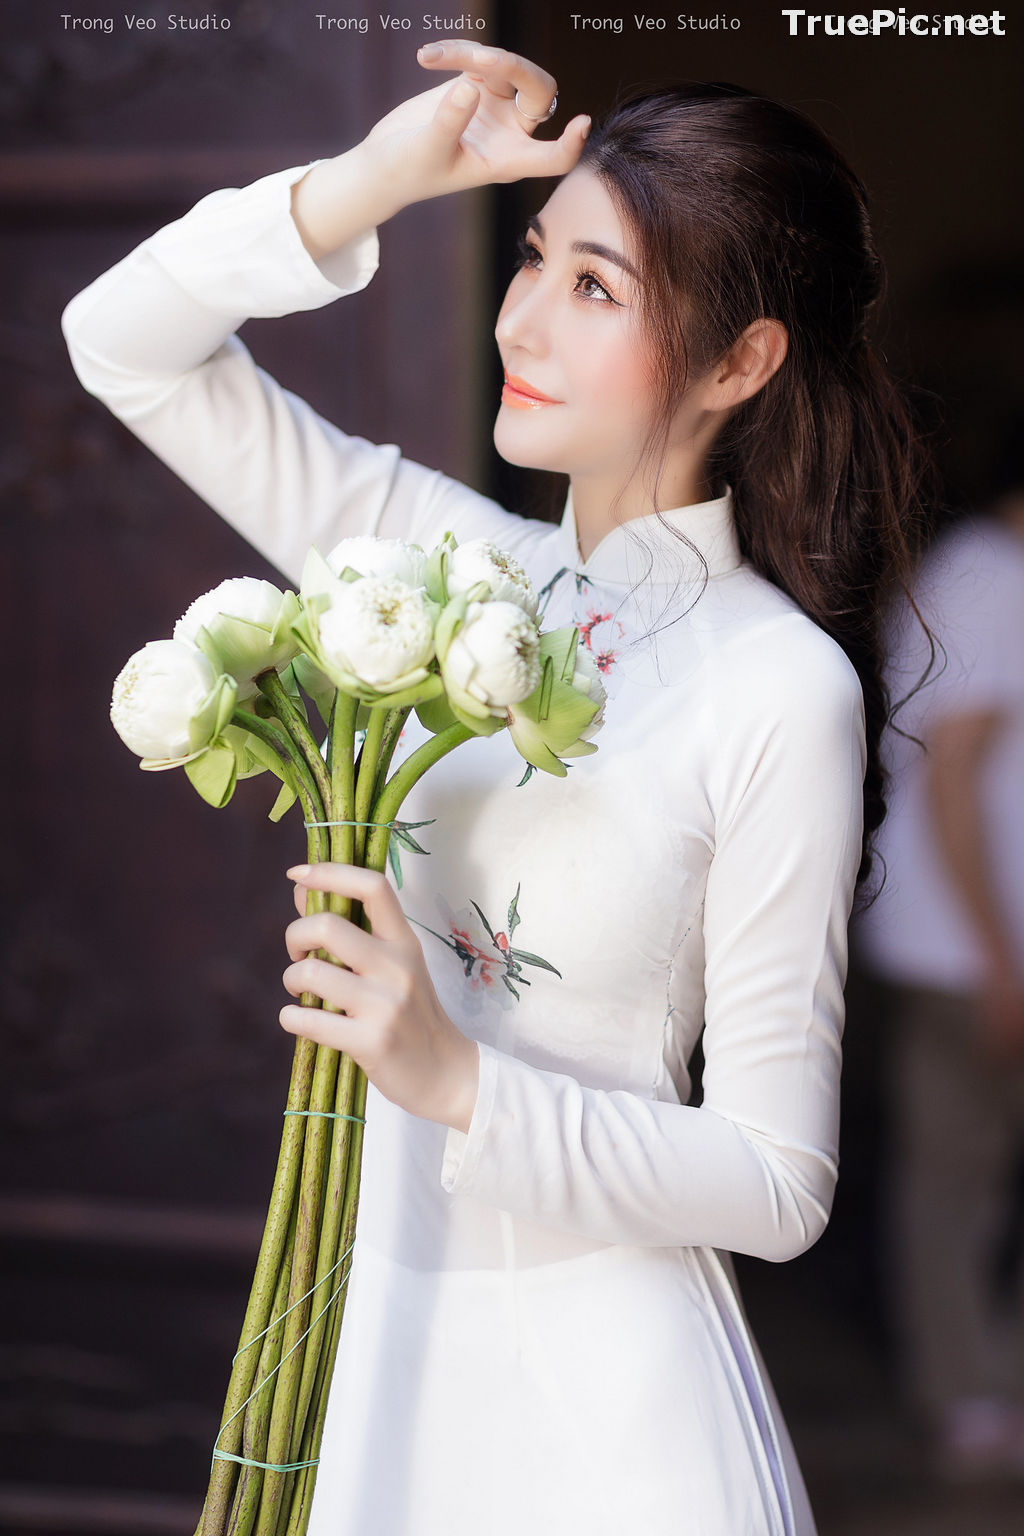 Image The Beauty of Vietnamese Girls with Traditional Dress (Ao Dai) #5 - TruePic.net - Picture-41